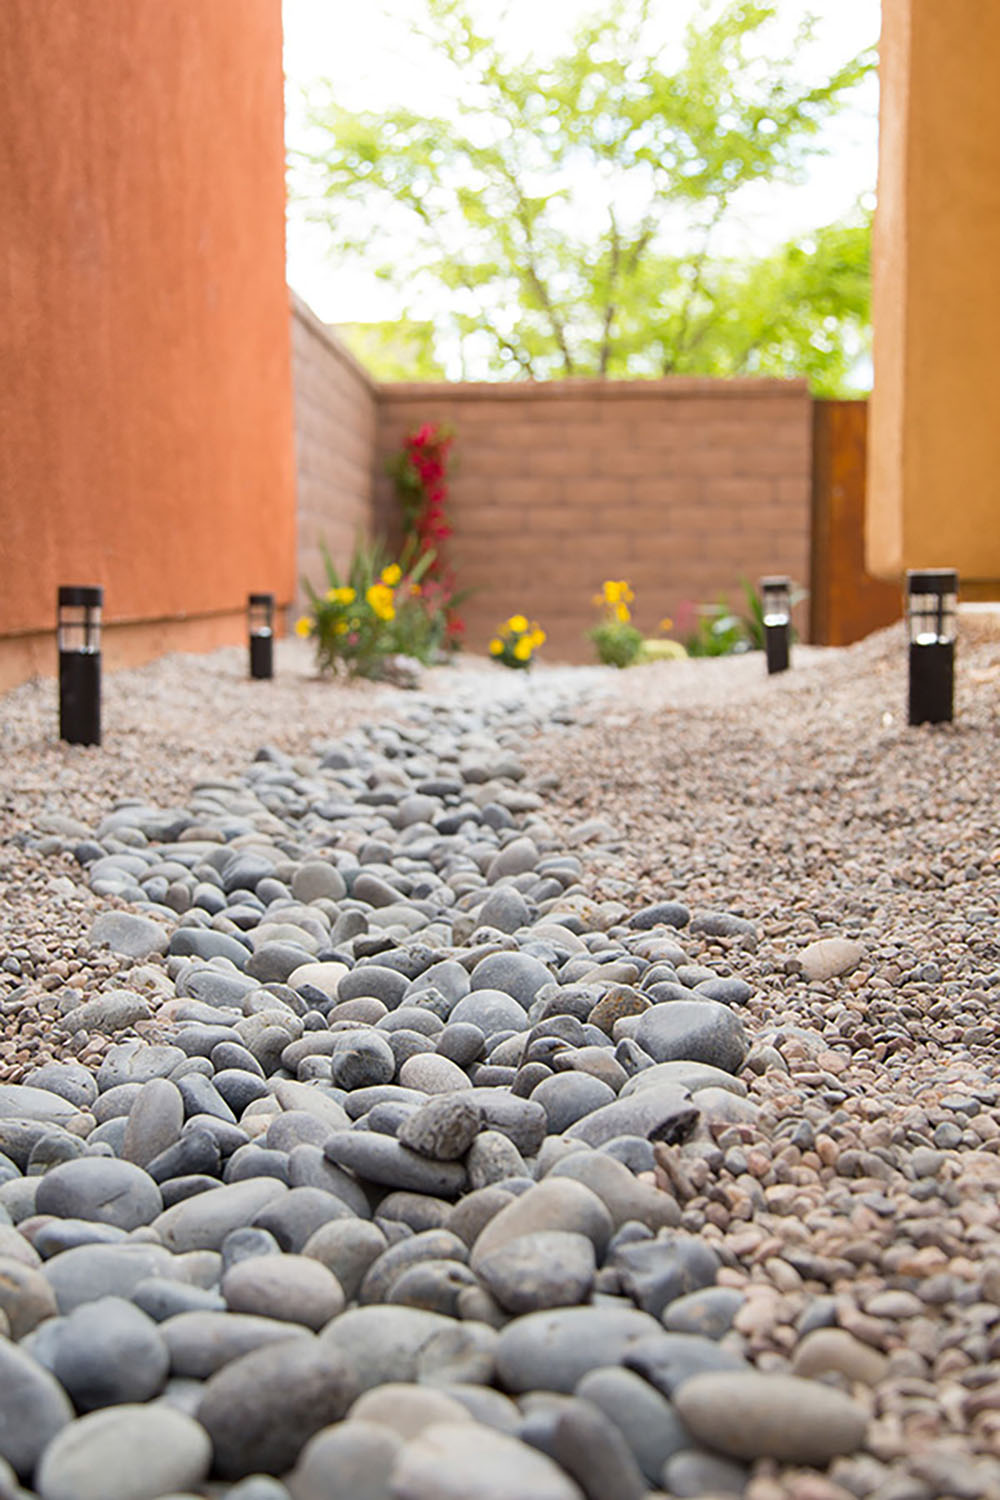 A completed DIY yard drainage made from Mexican beach pebbles and pea gravel is decorated with landscape lighting and plants.